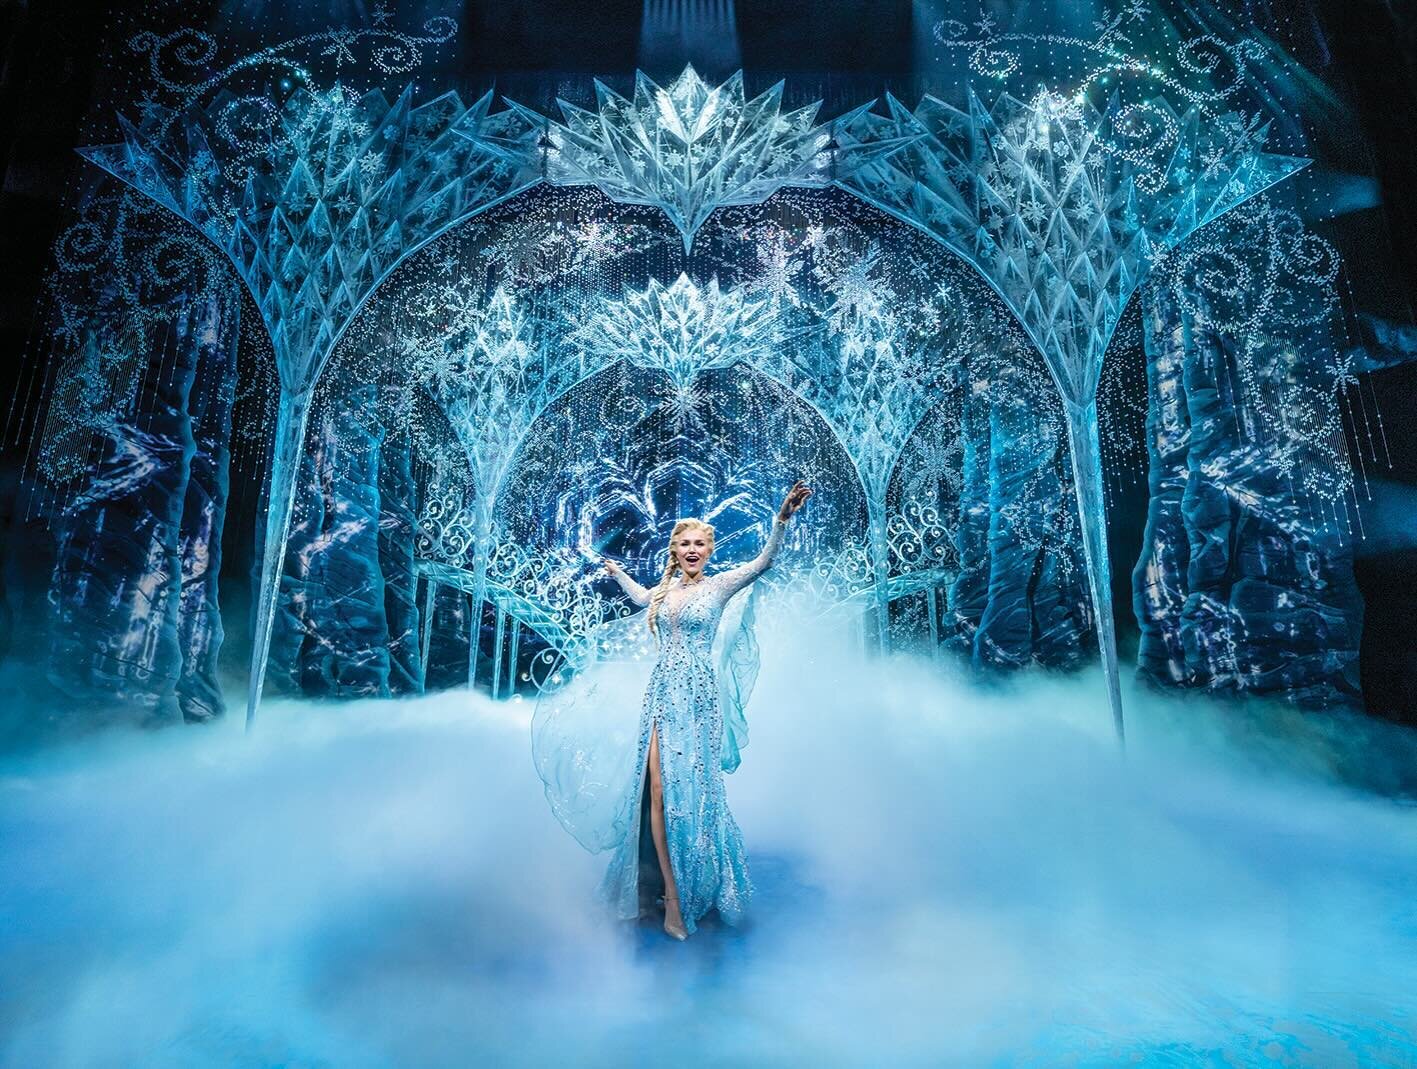 THE MAGIC OF FROZEN THE MUSICAL 

Disney&rsquo;s Frozen The Musical, now enchanting audiences in London&rsquo;s West End, offers an unforgettable theatrical experience that transcends age and taps into the timeless magic of storytelling. Ultimately, 